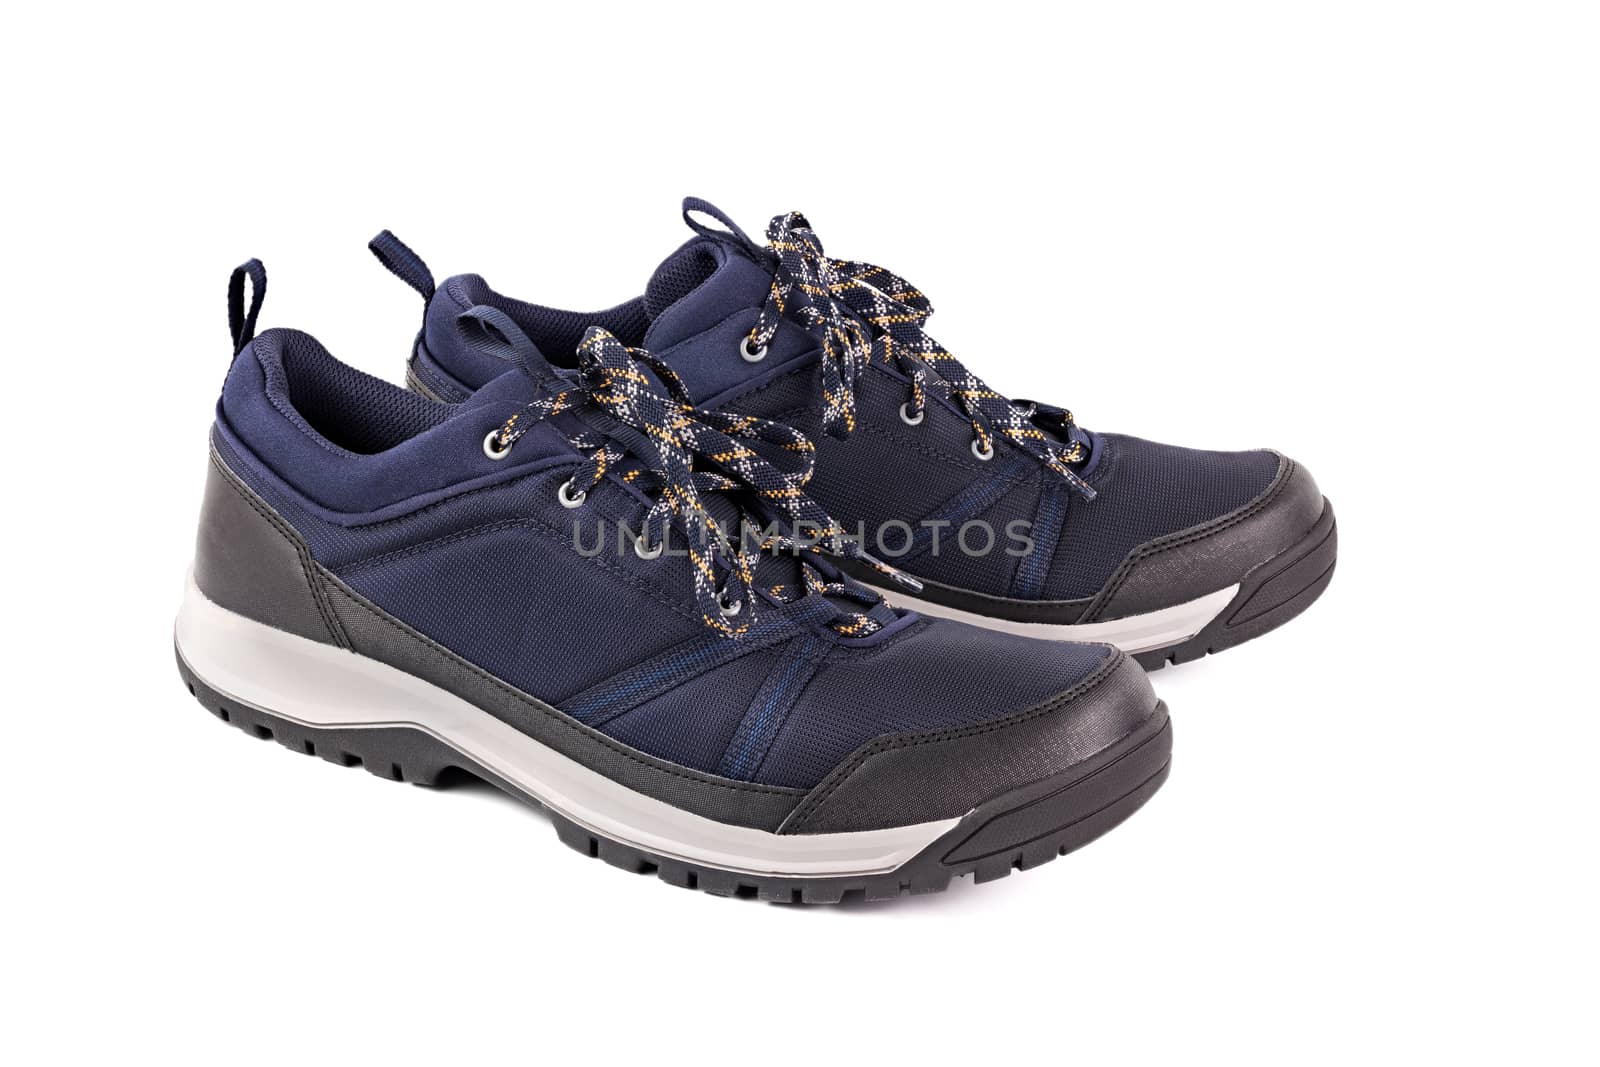 black and blue outdoor empty lightweight waterproof breathable fabric sneakers isolated on white background by z1b